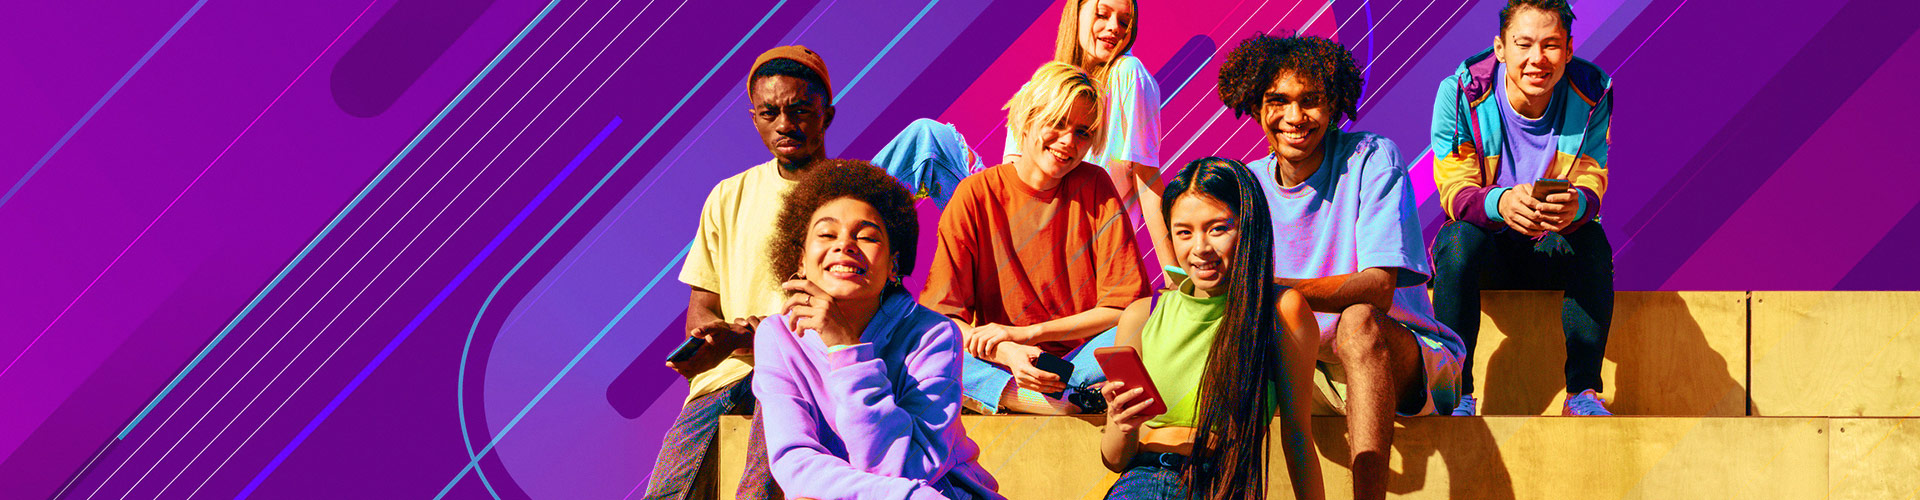 Main banner for 70 Million Gen Z are Coming blog featuring diverse group of smiling young adults